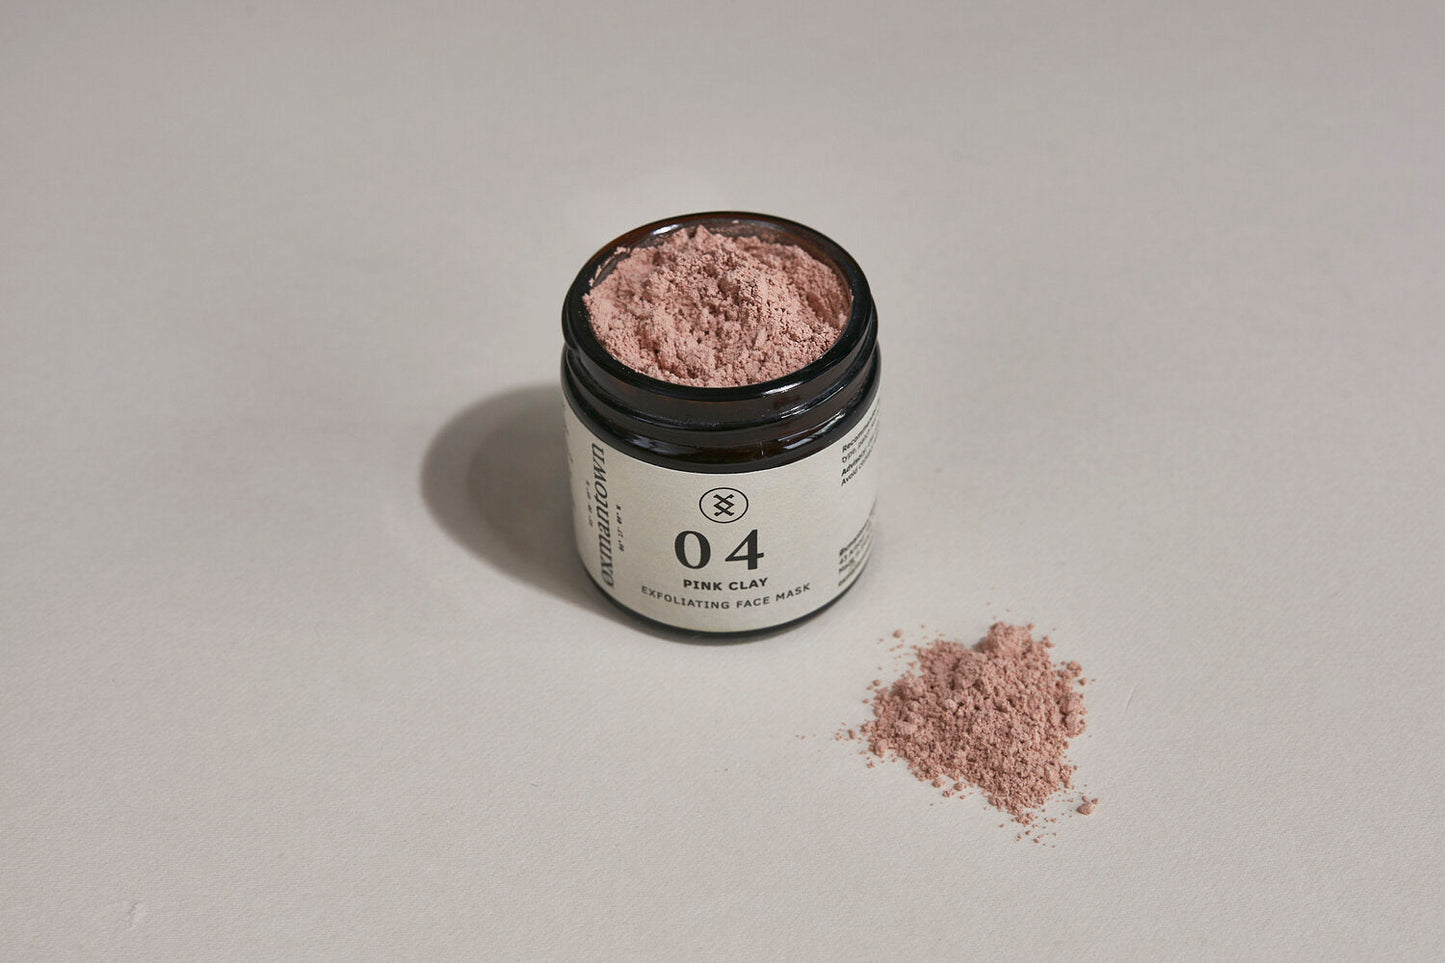 04 Pink Clay Exfoliating Face Mask - Collected